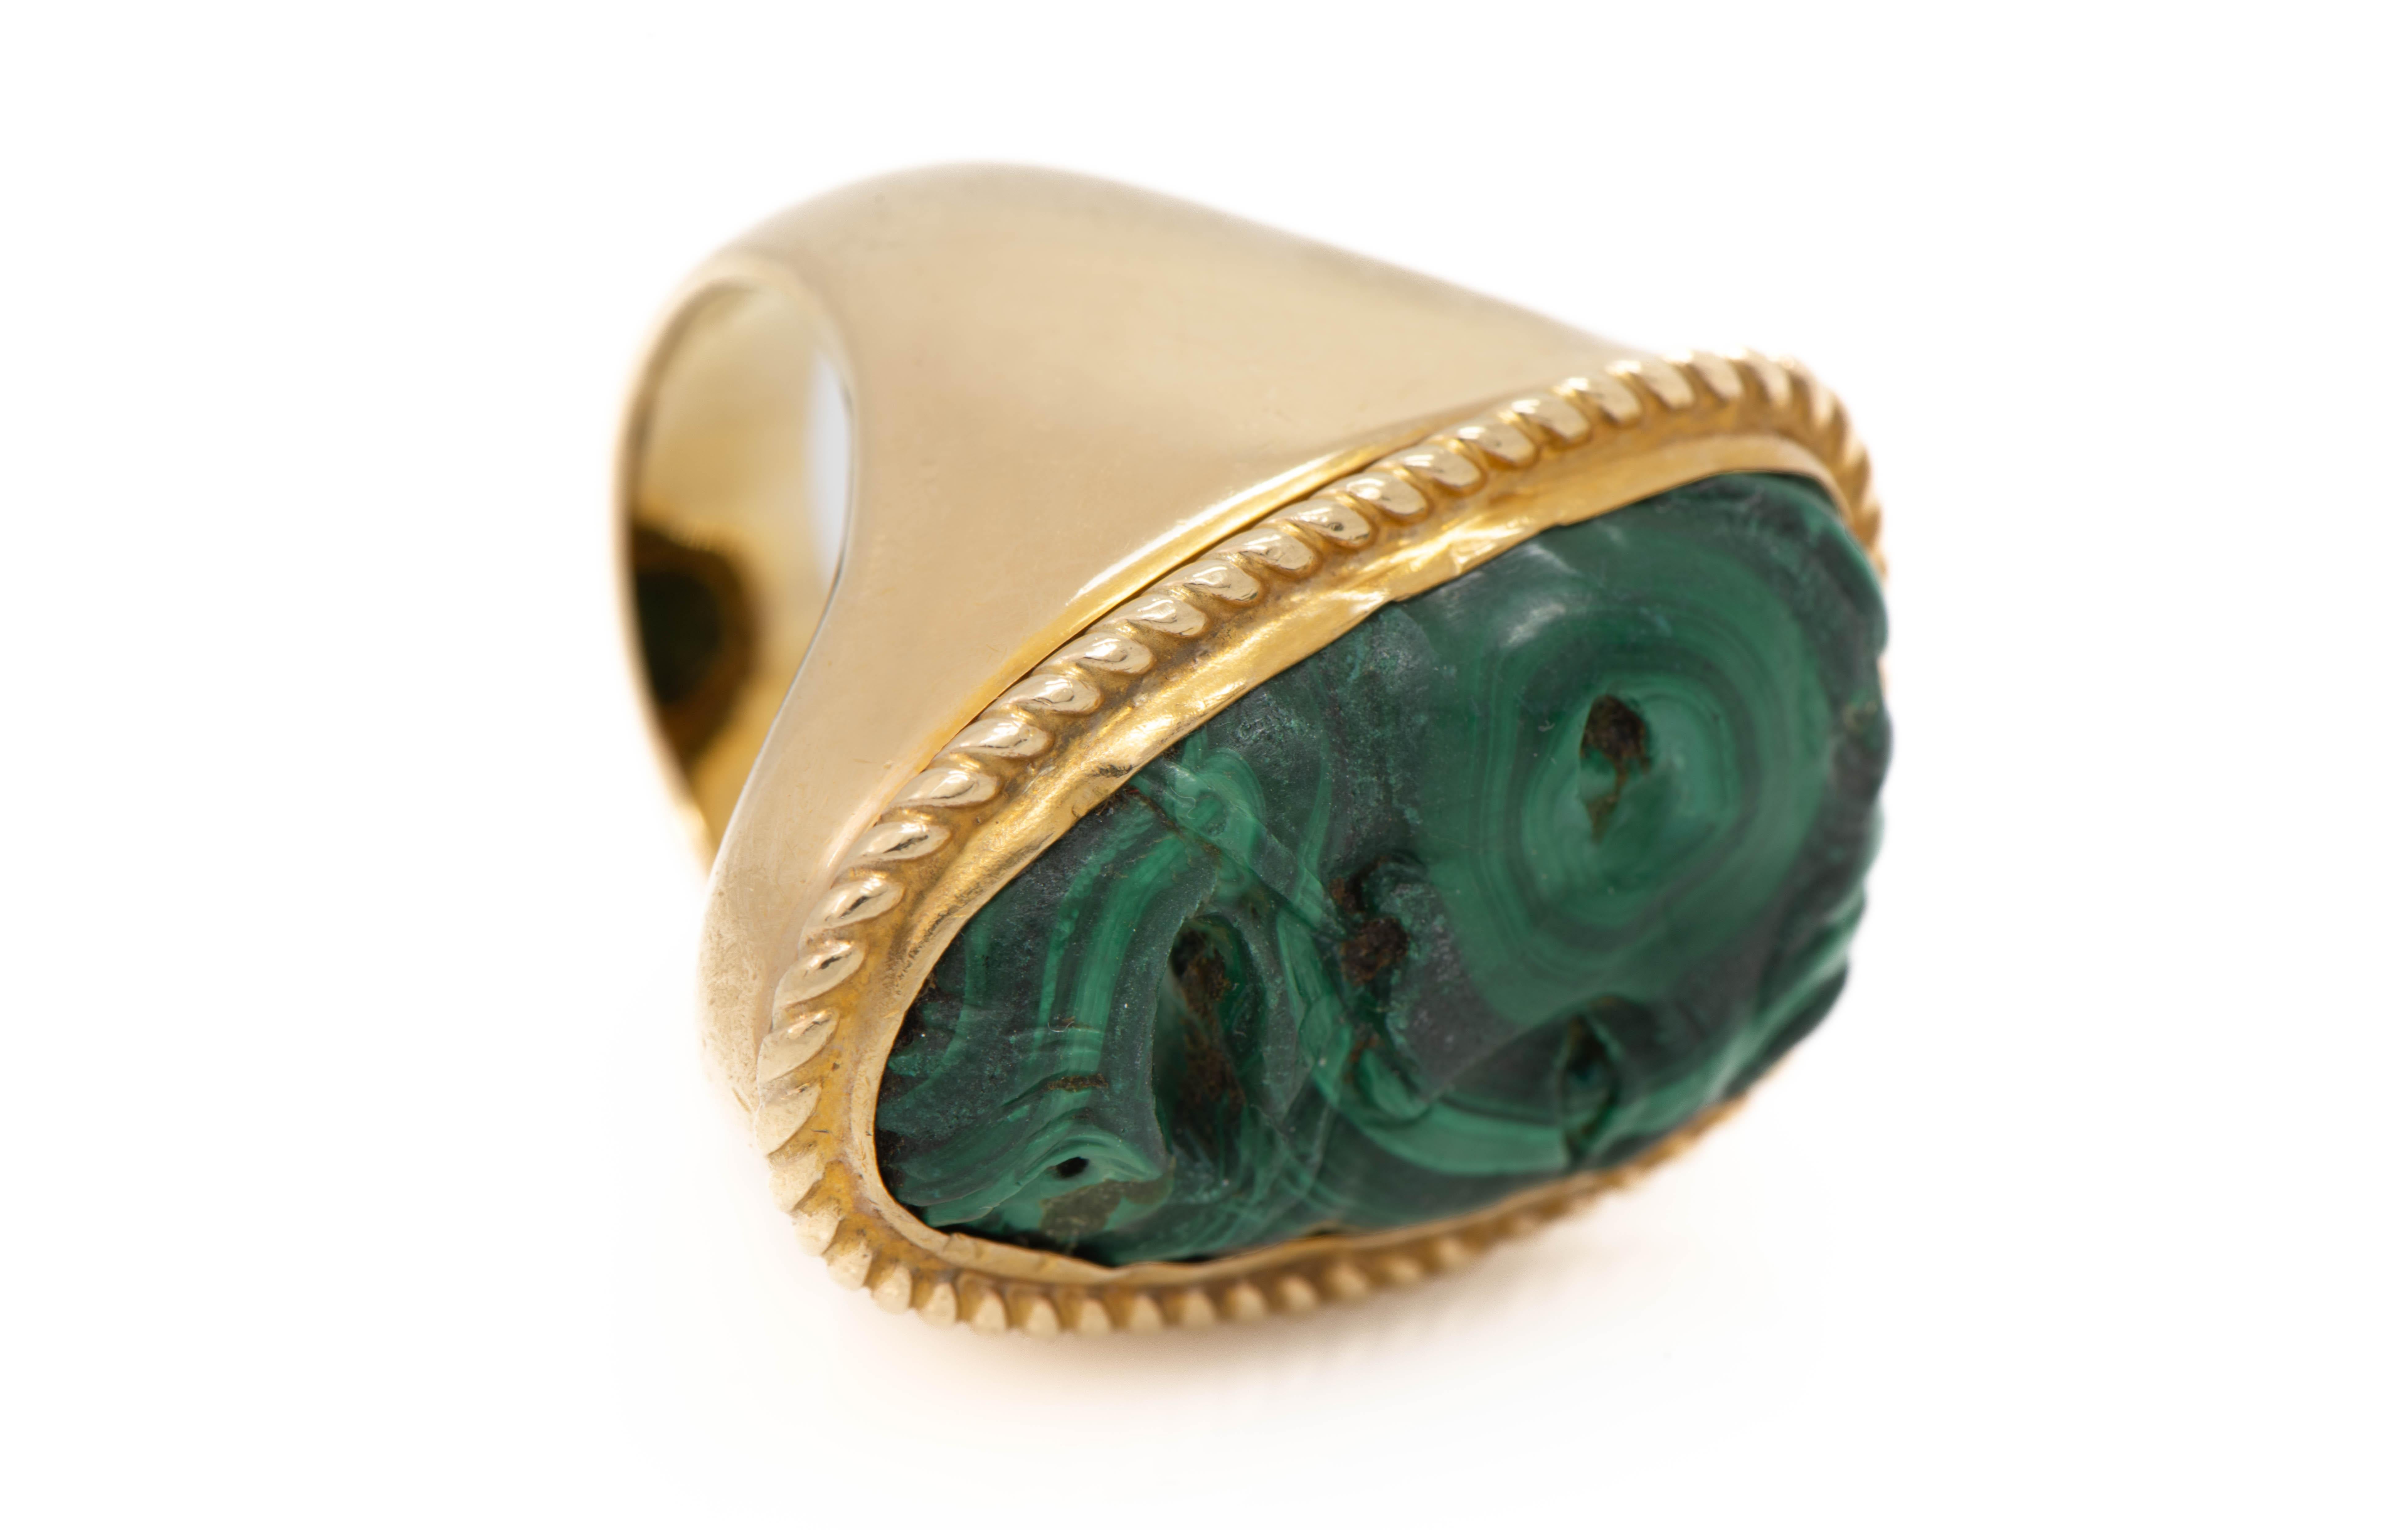 Men's Carved Malachite Gold Ring

A carved malachite face set in 14k yellow gold

Ring Size: 9

Gross Weight: 30.8 grams 